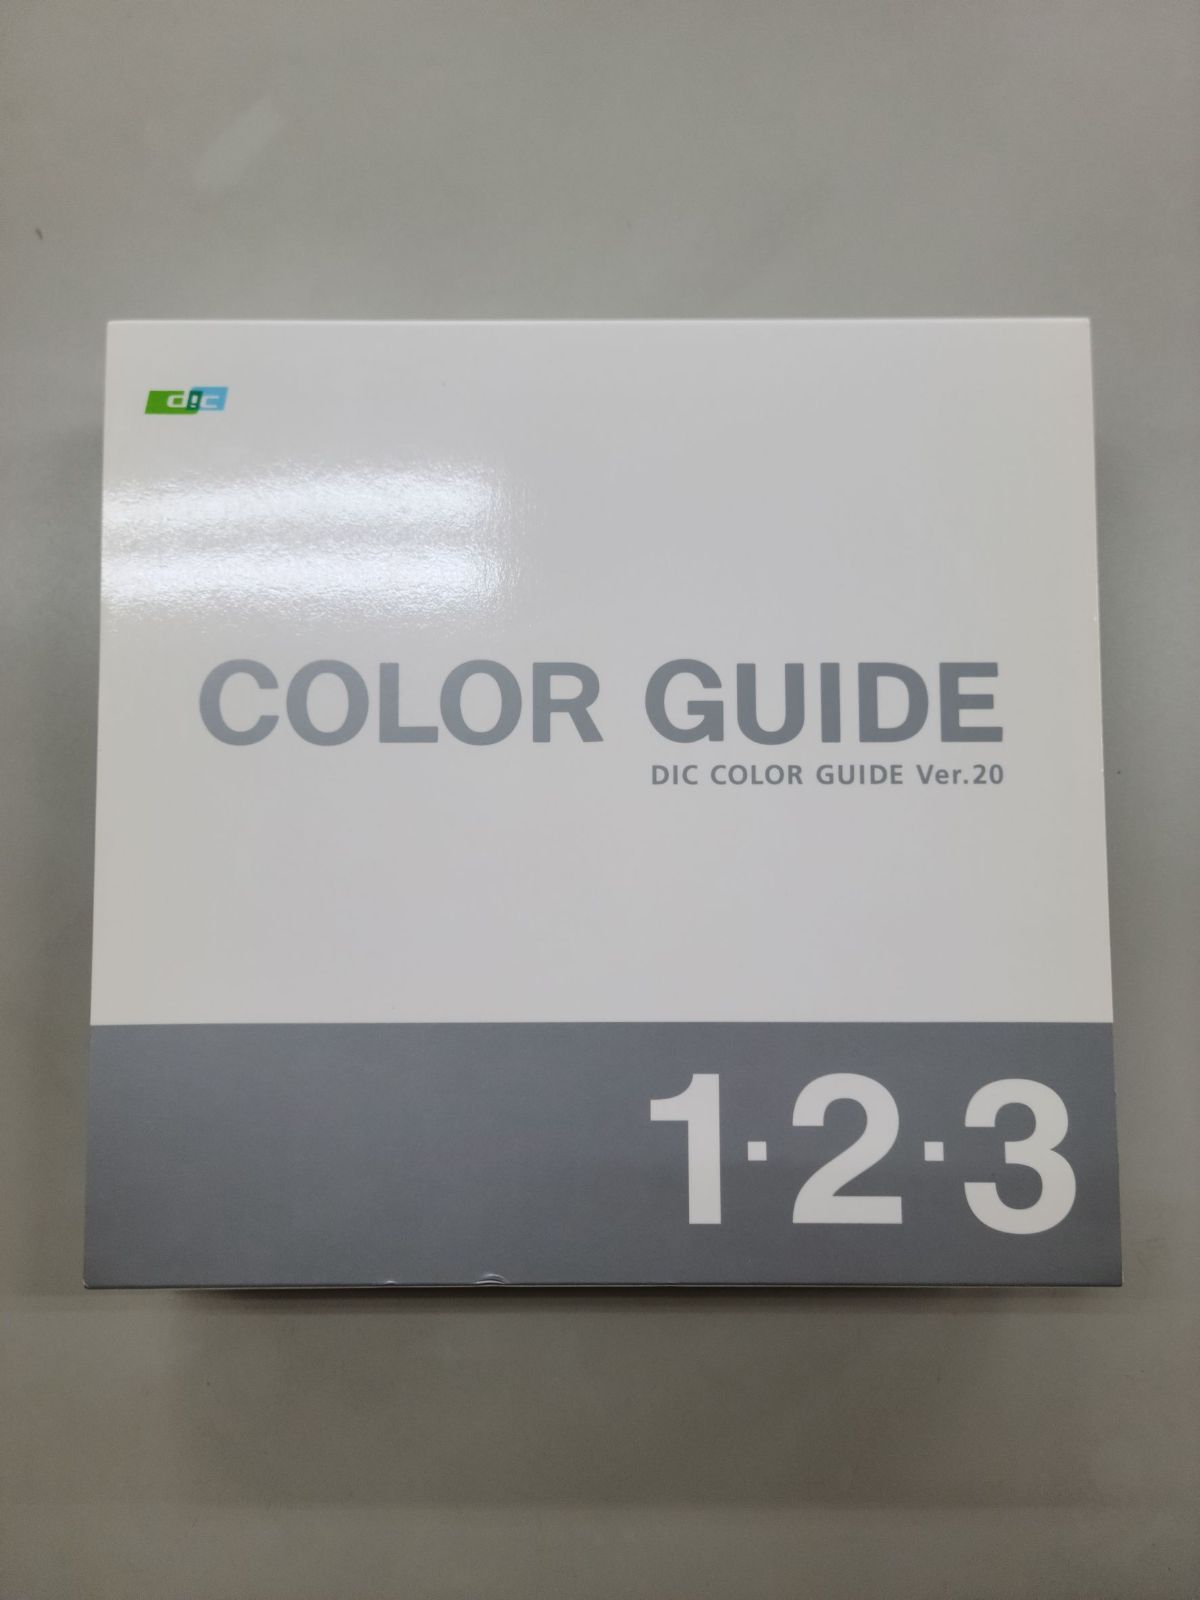 DIC カラーガイド 第20版 1・2・3 DIC COLOR GUIDE Ver.20 1・2・3